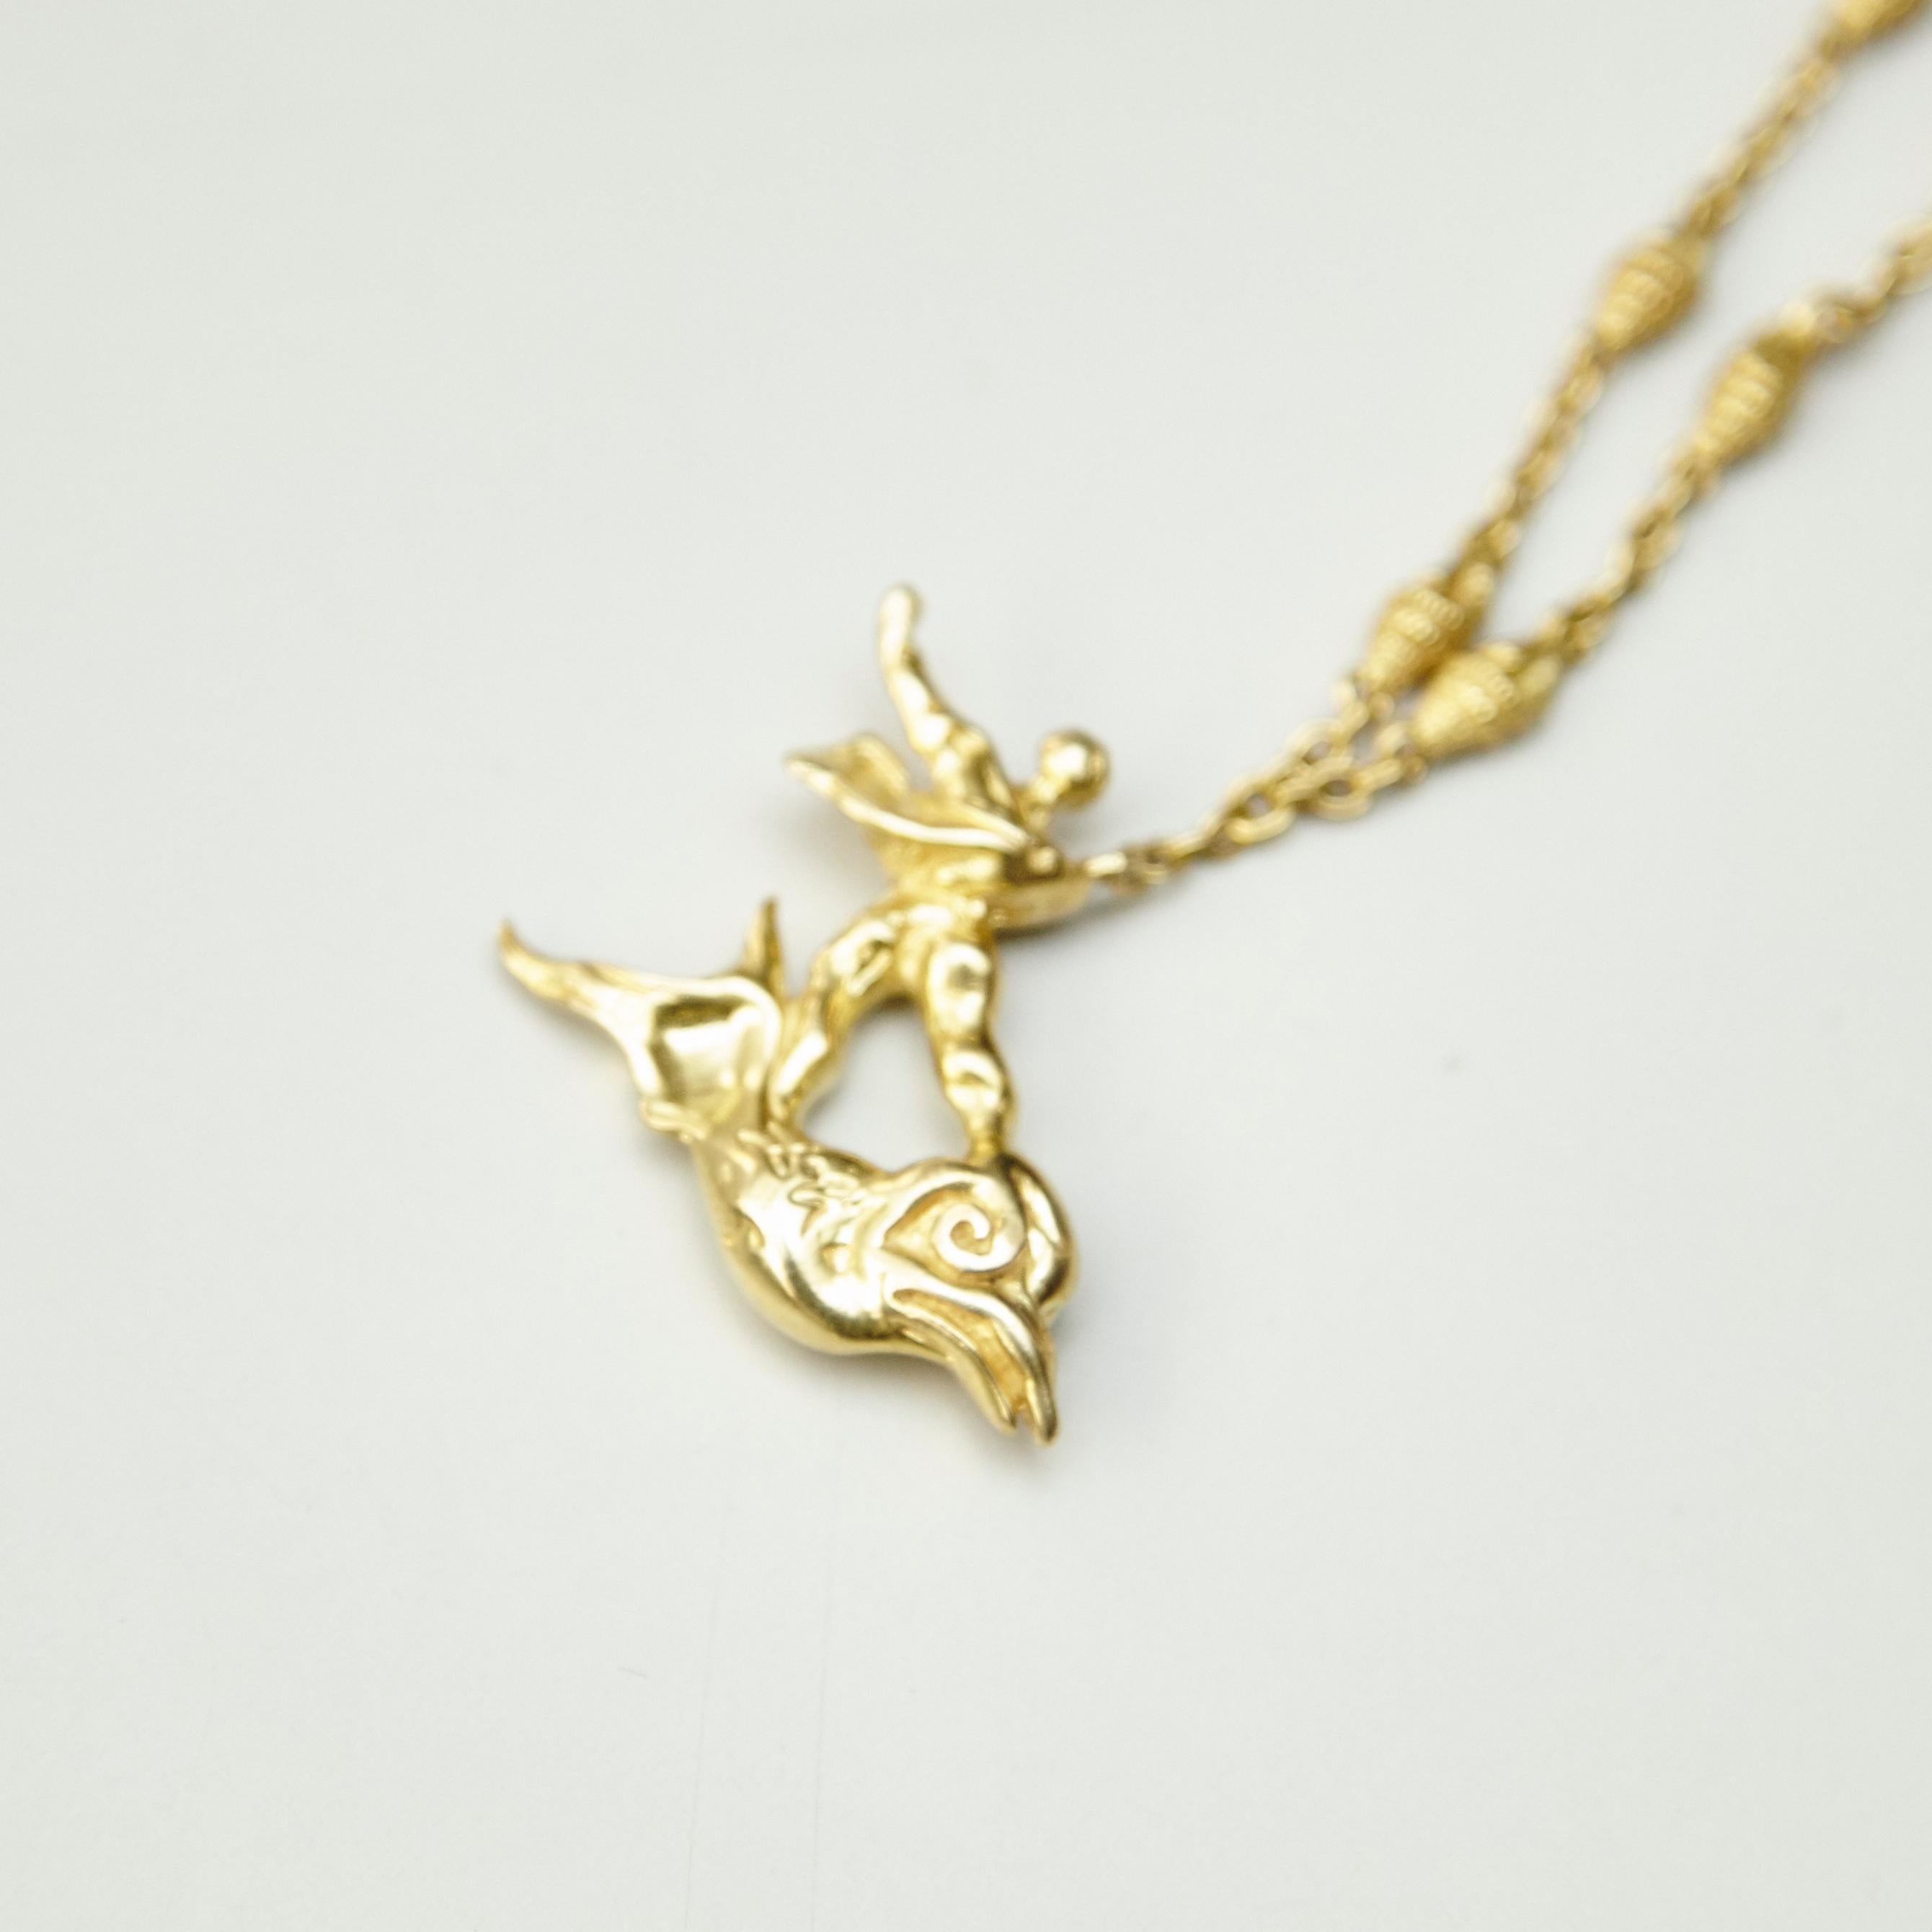 Limited Edition Dalí Gold Necklace and Bracelet 'The Man and the Dolphin' 1